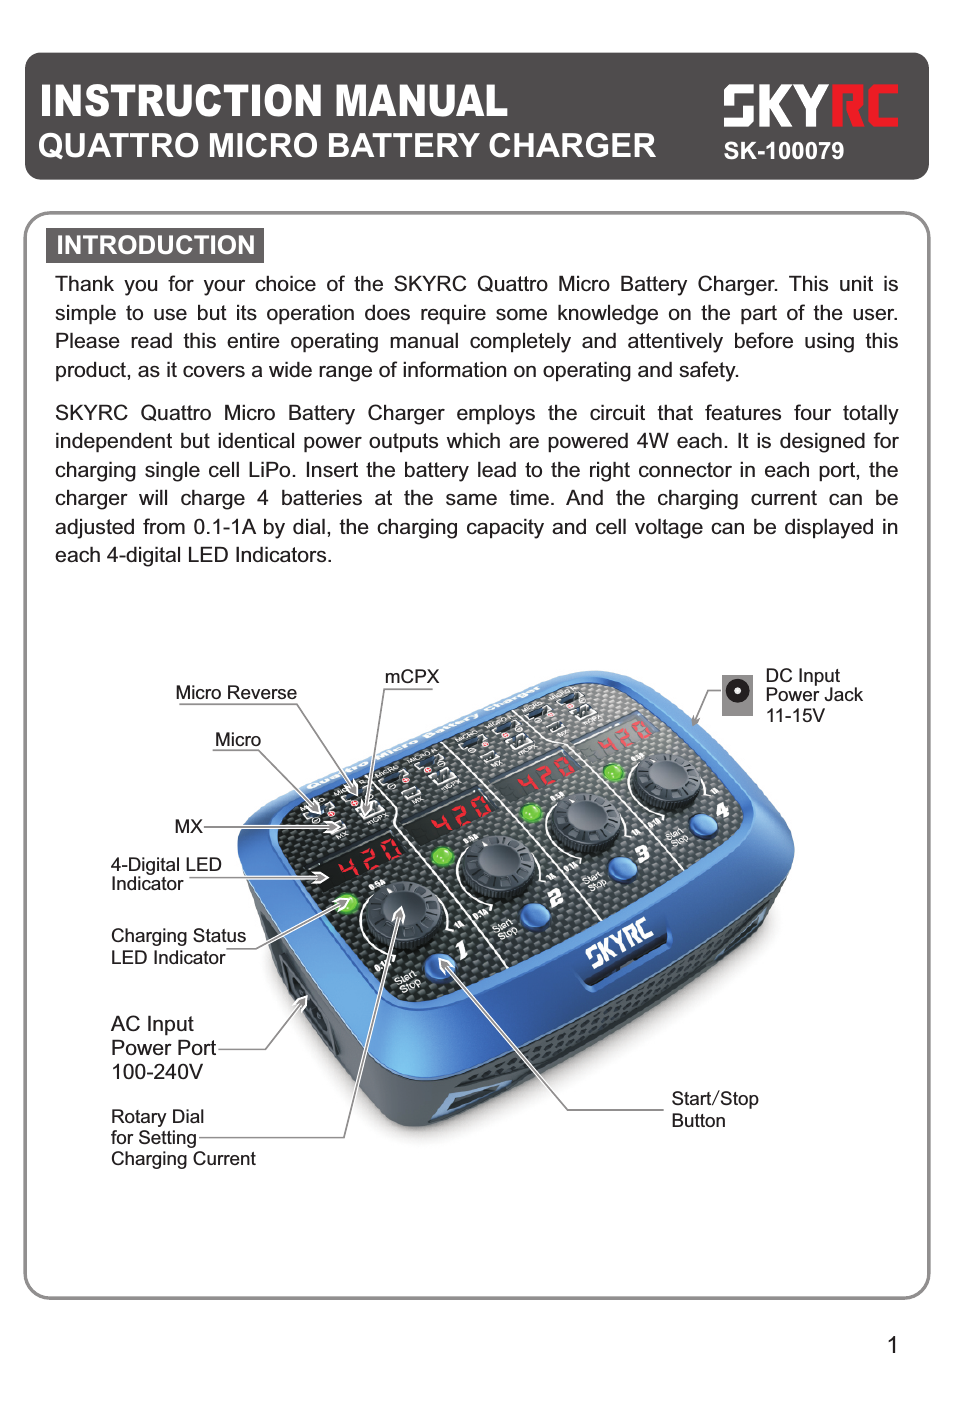 Quattro Micro Battery Charger